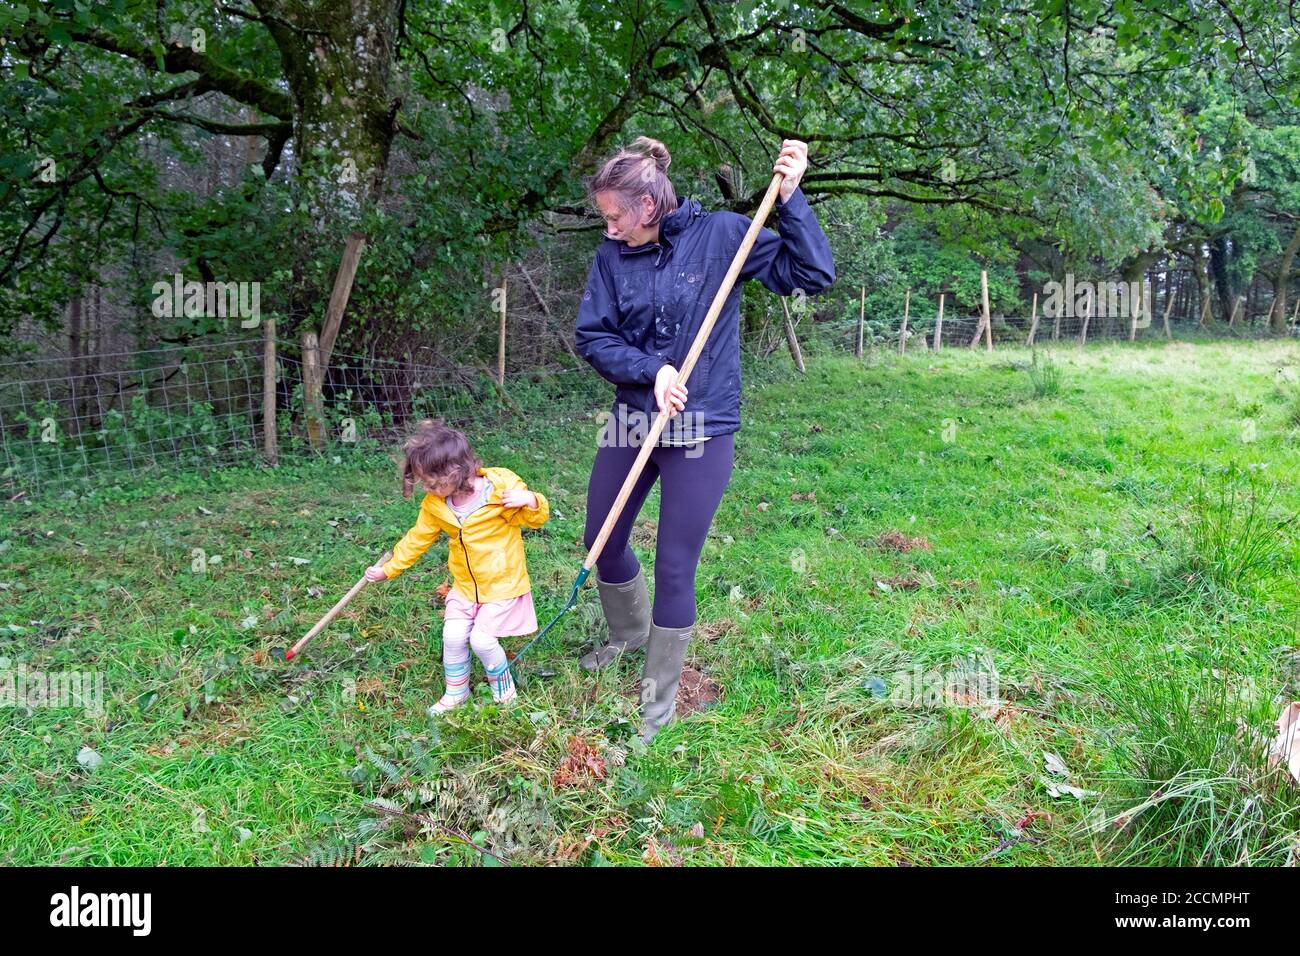 Woman and child with rakes raking clearing grass and bracken in a field so fence can be repaired in summer Carmarthenshire Wales UK   KATHY DEWITT Stock Photo